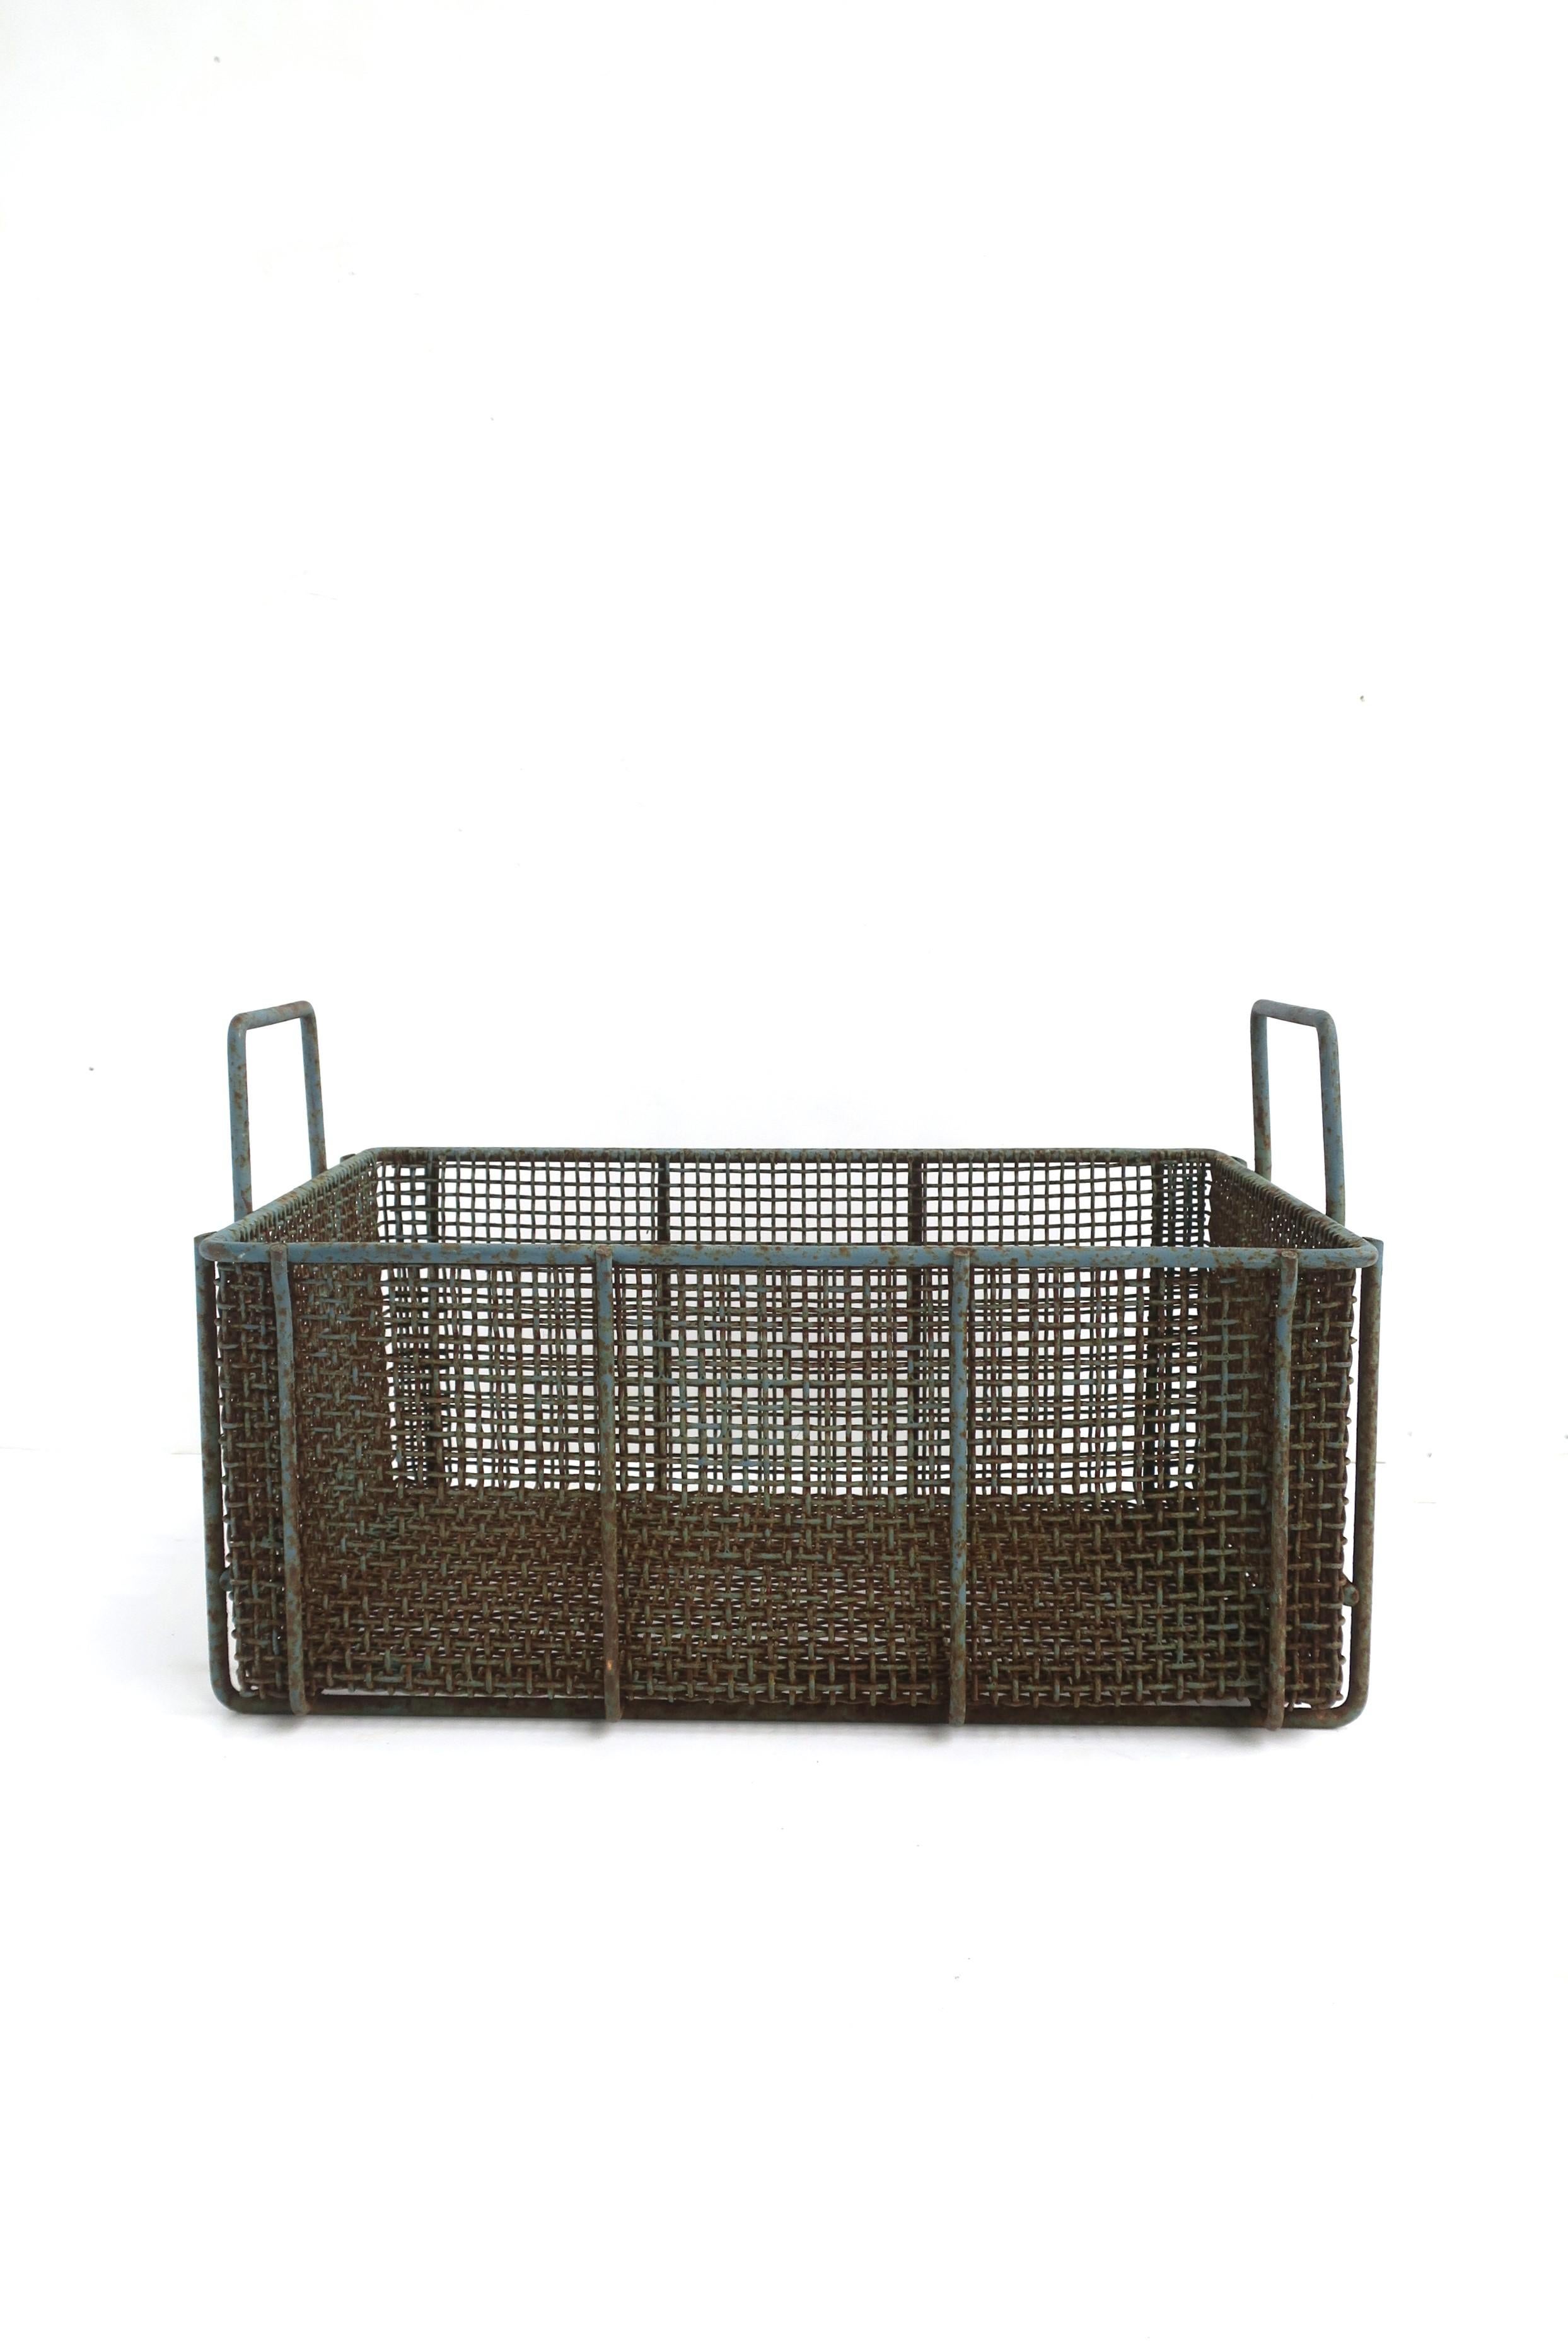 A substantial and well-made iron basket with a blue-gray hue, circa mid-20th century or earlier. Basket is rectangular with handles, likely used for gathering and holding fresh clams or other shellfish from the deck of clam boat. Today, it can be